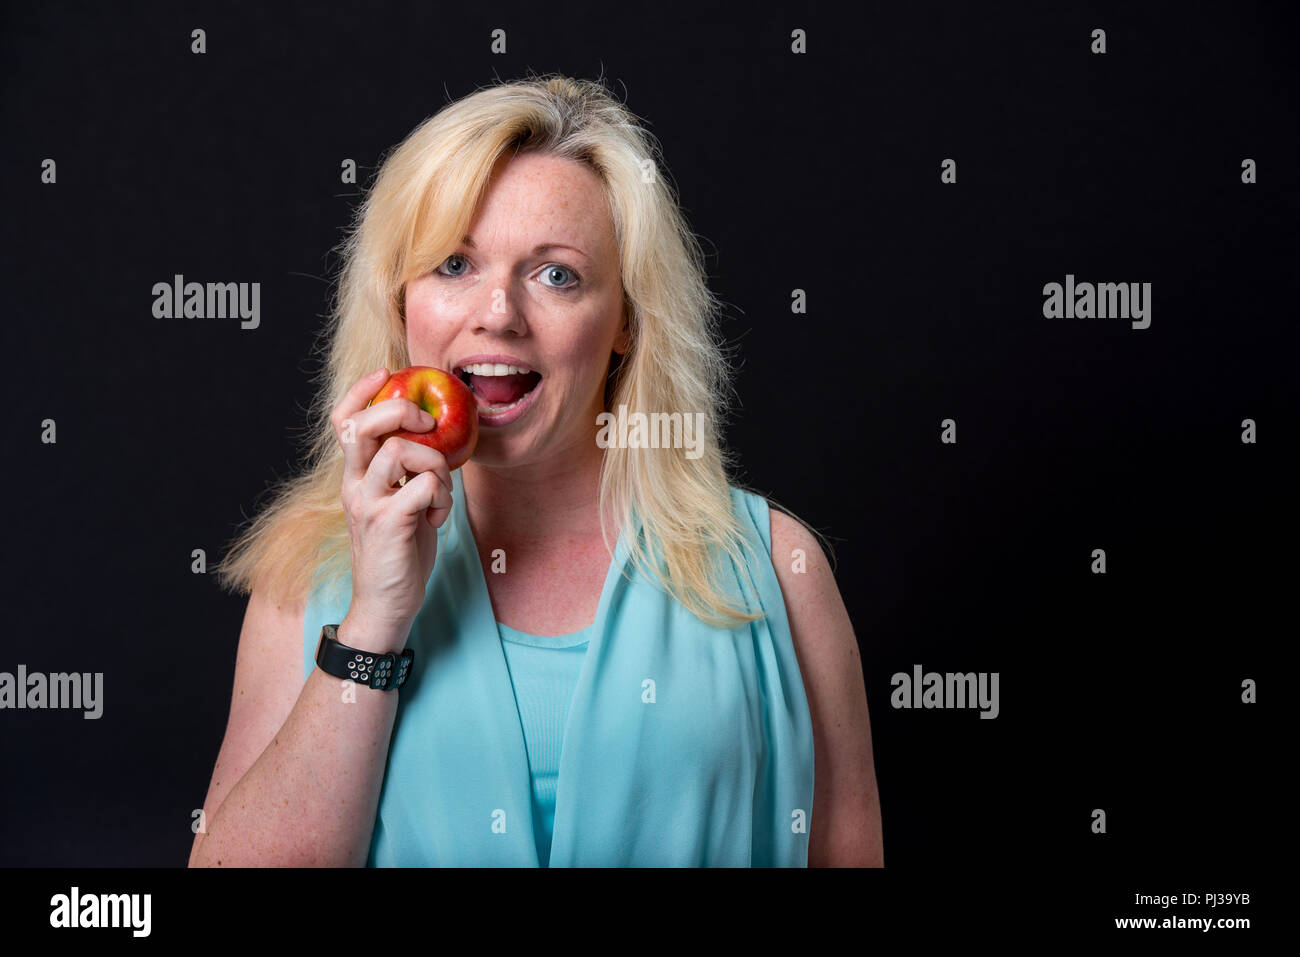 Blonde woman eating an apple Stock Photo